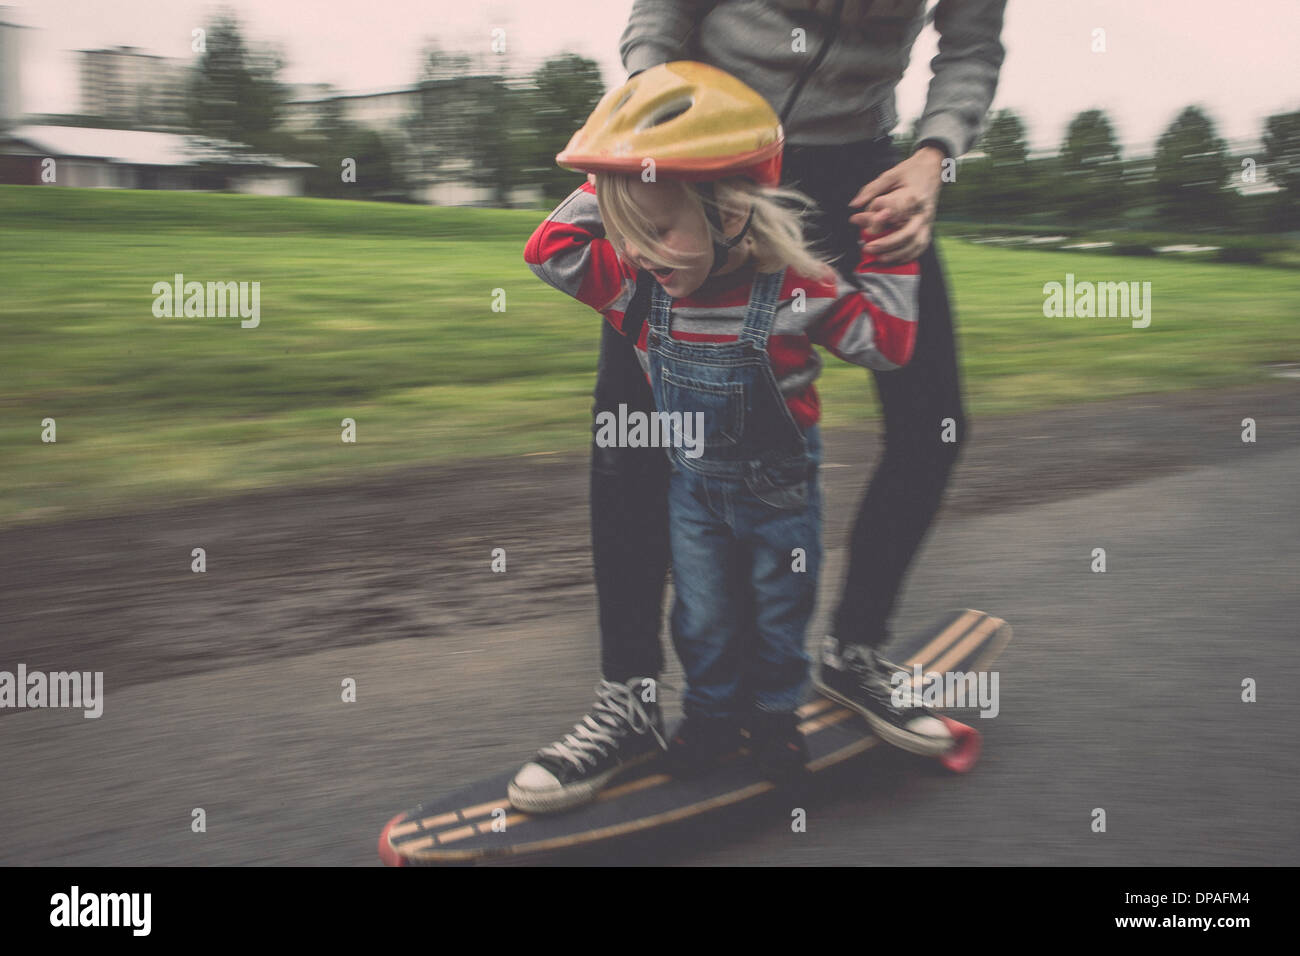 Mother and daughter riding on skateboard in park Stock Photo